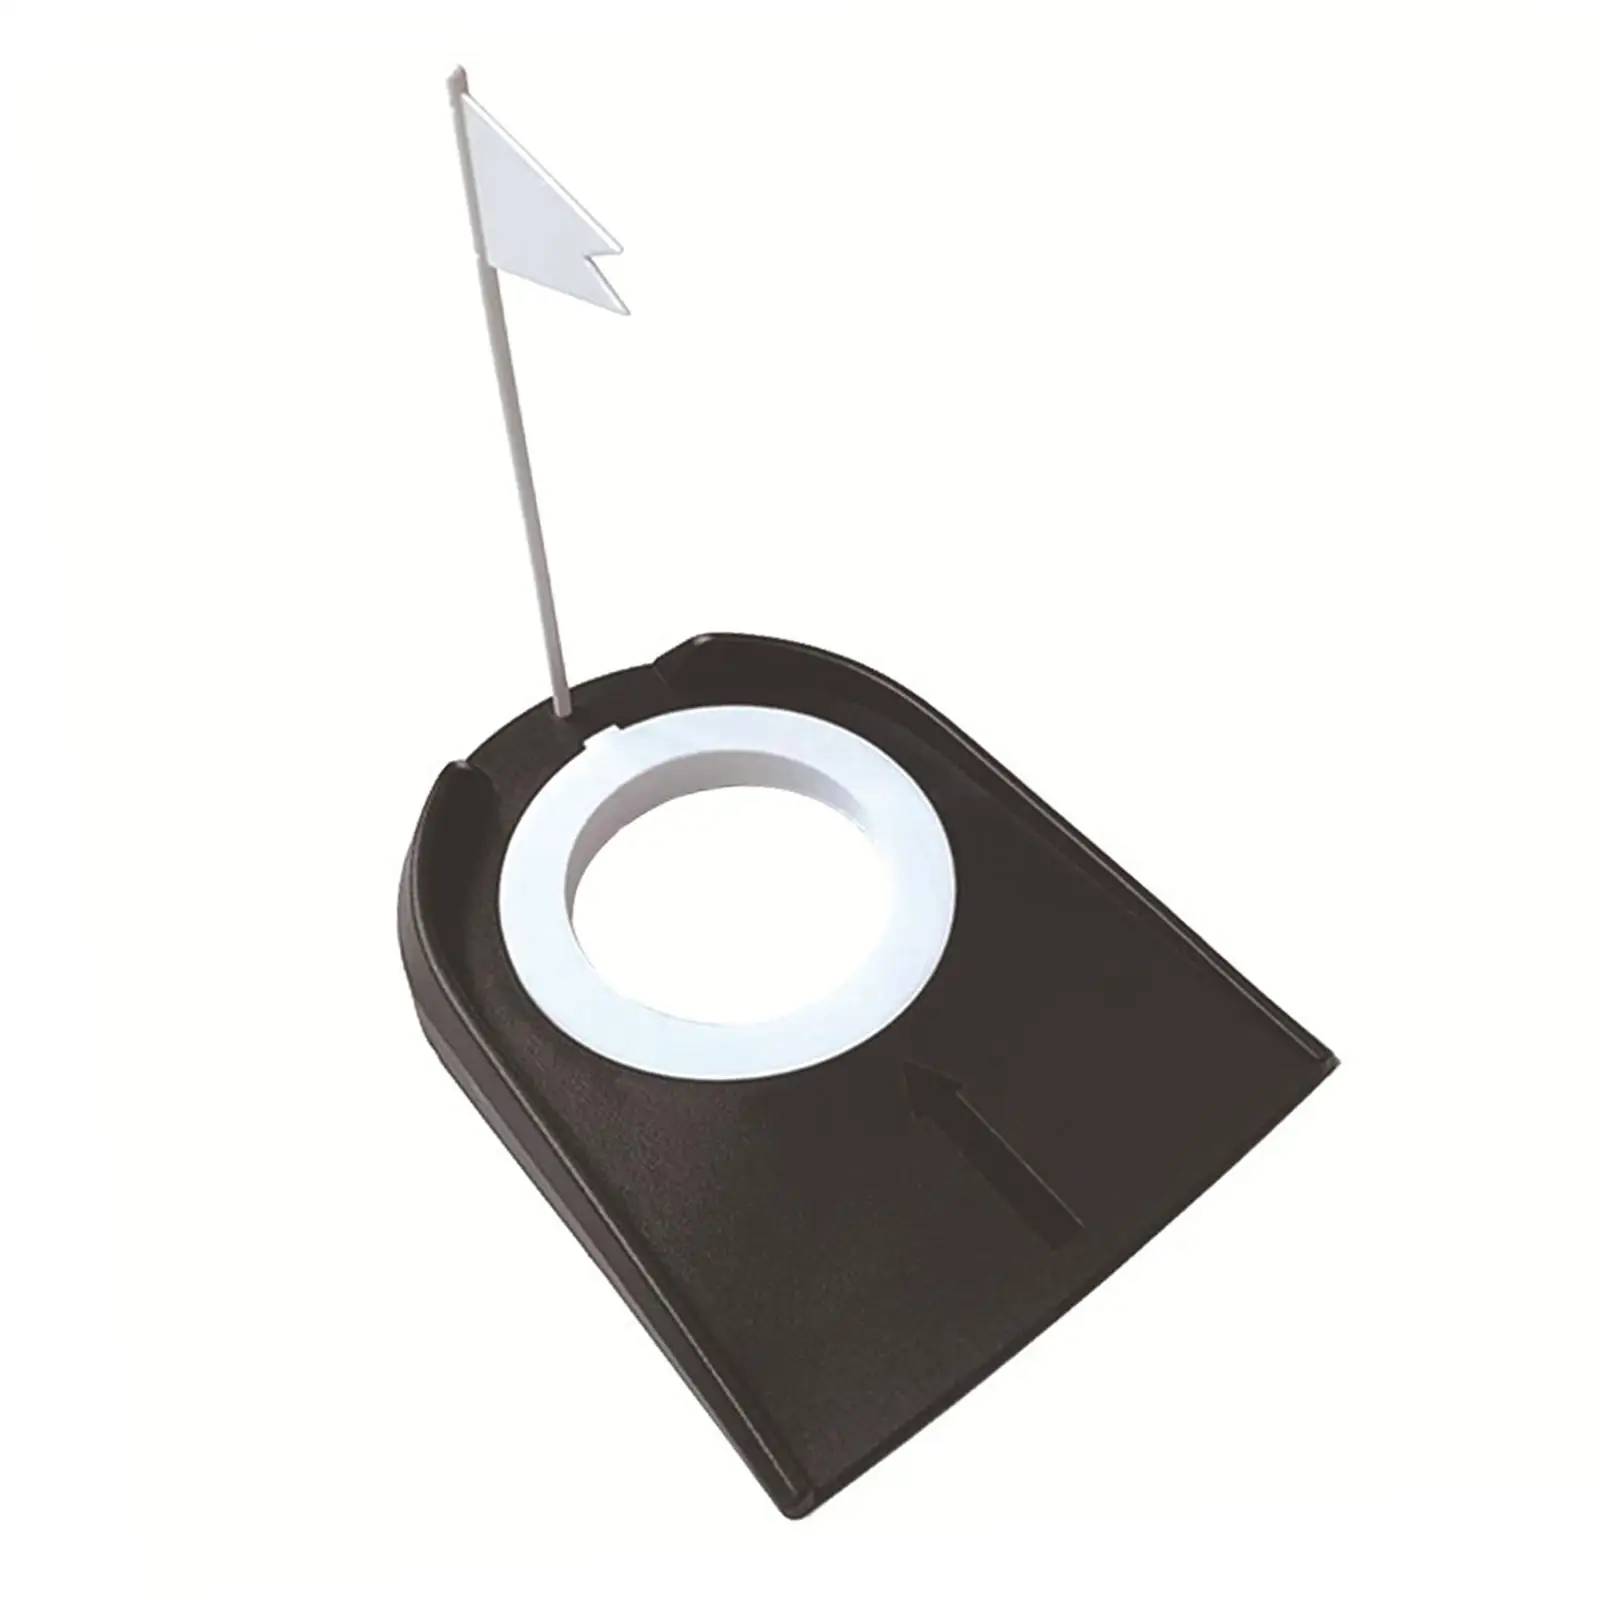 

Golf Putting Cup and Flag Hole Stable Practical Lightweight Golf Training Accessories Golf Putting Hole for Adults Kids